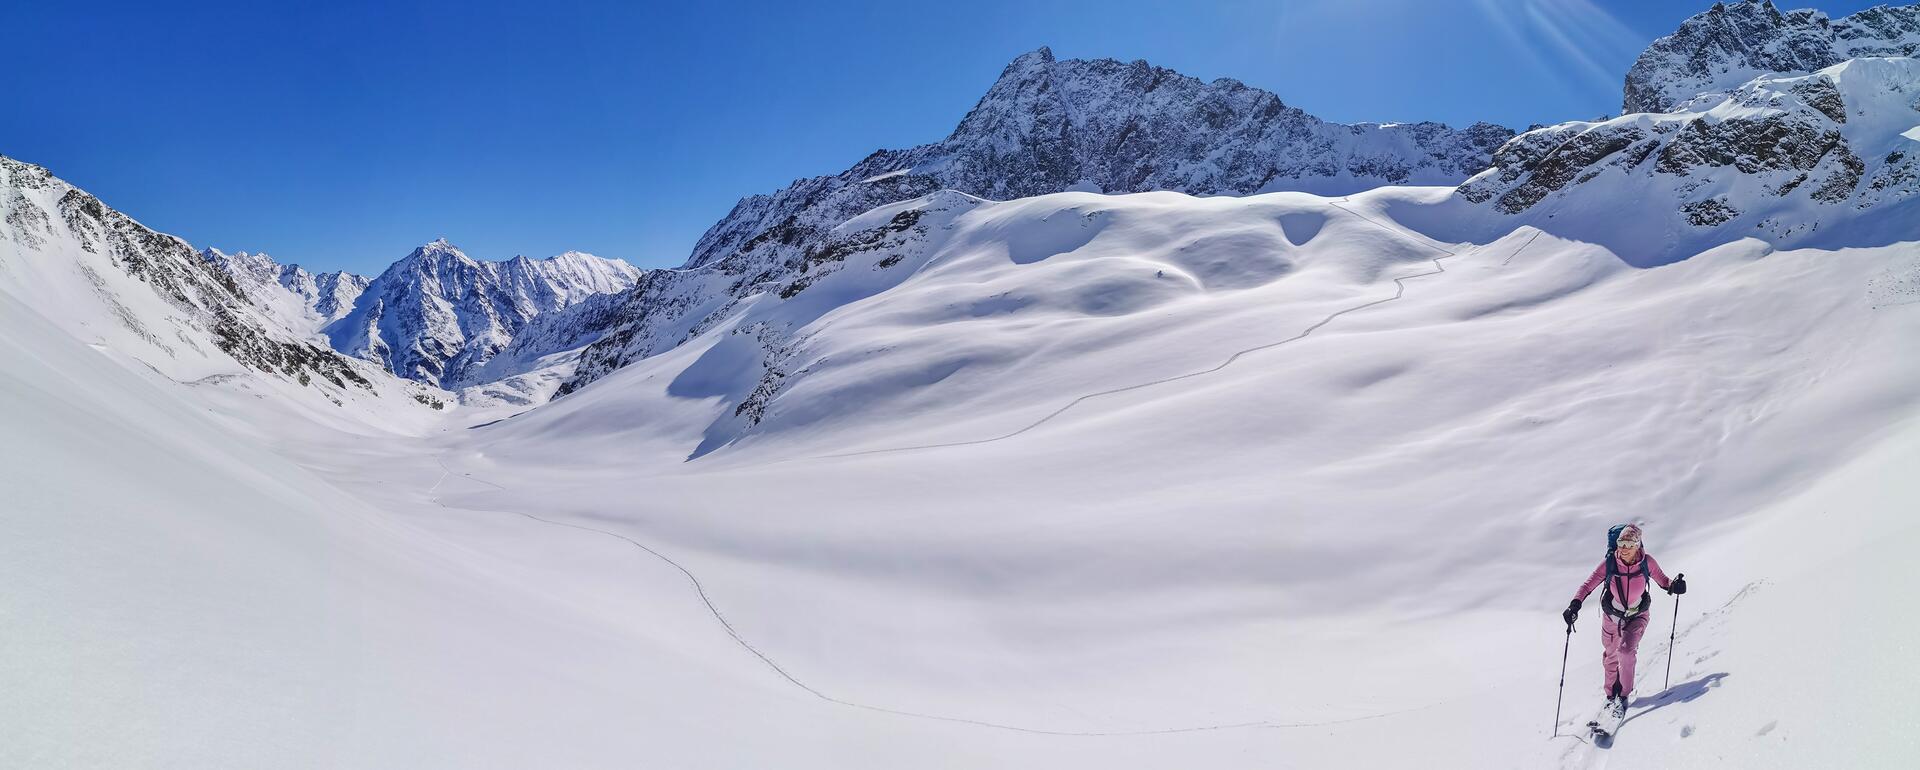 ski touring in the Pitztal valley